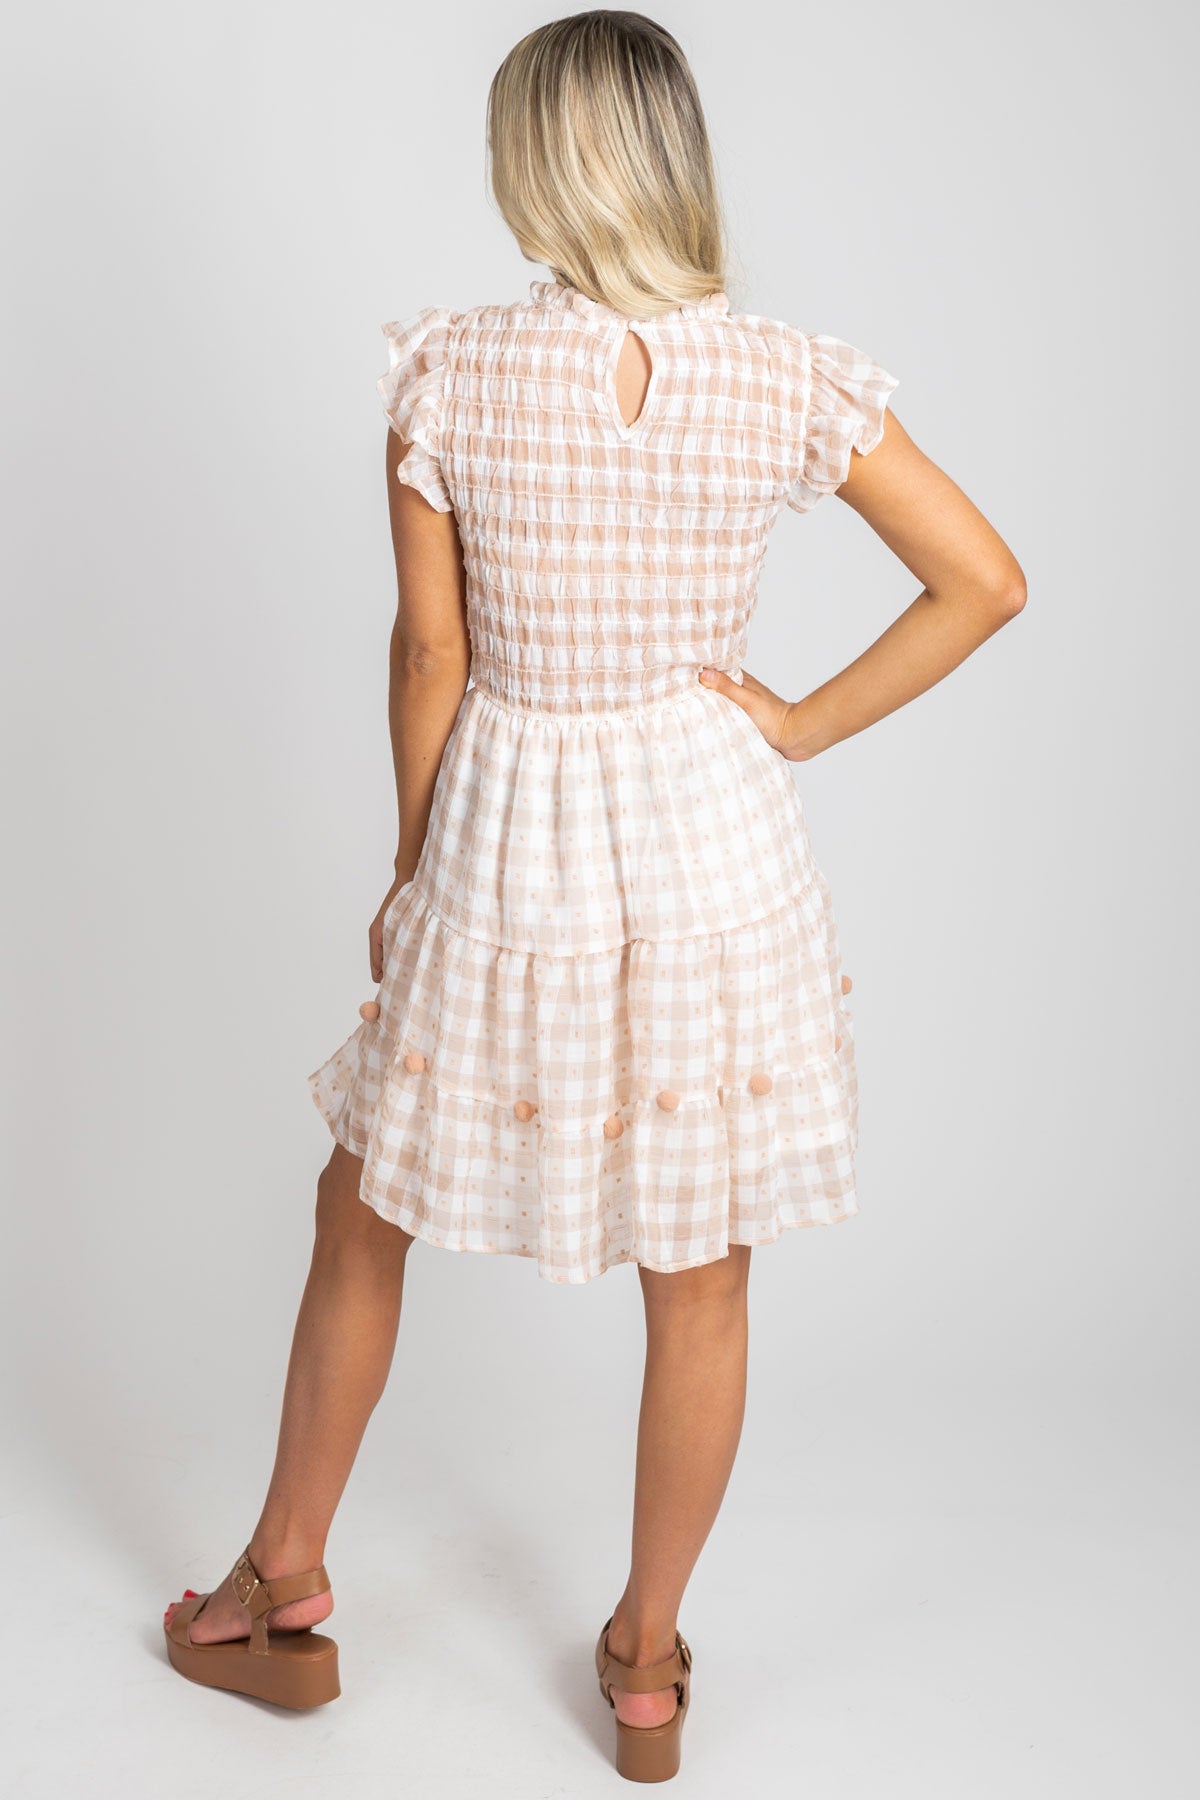 Boutique Women's Gingham Mini Dress with Smocked Bodice